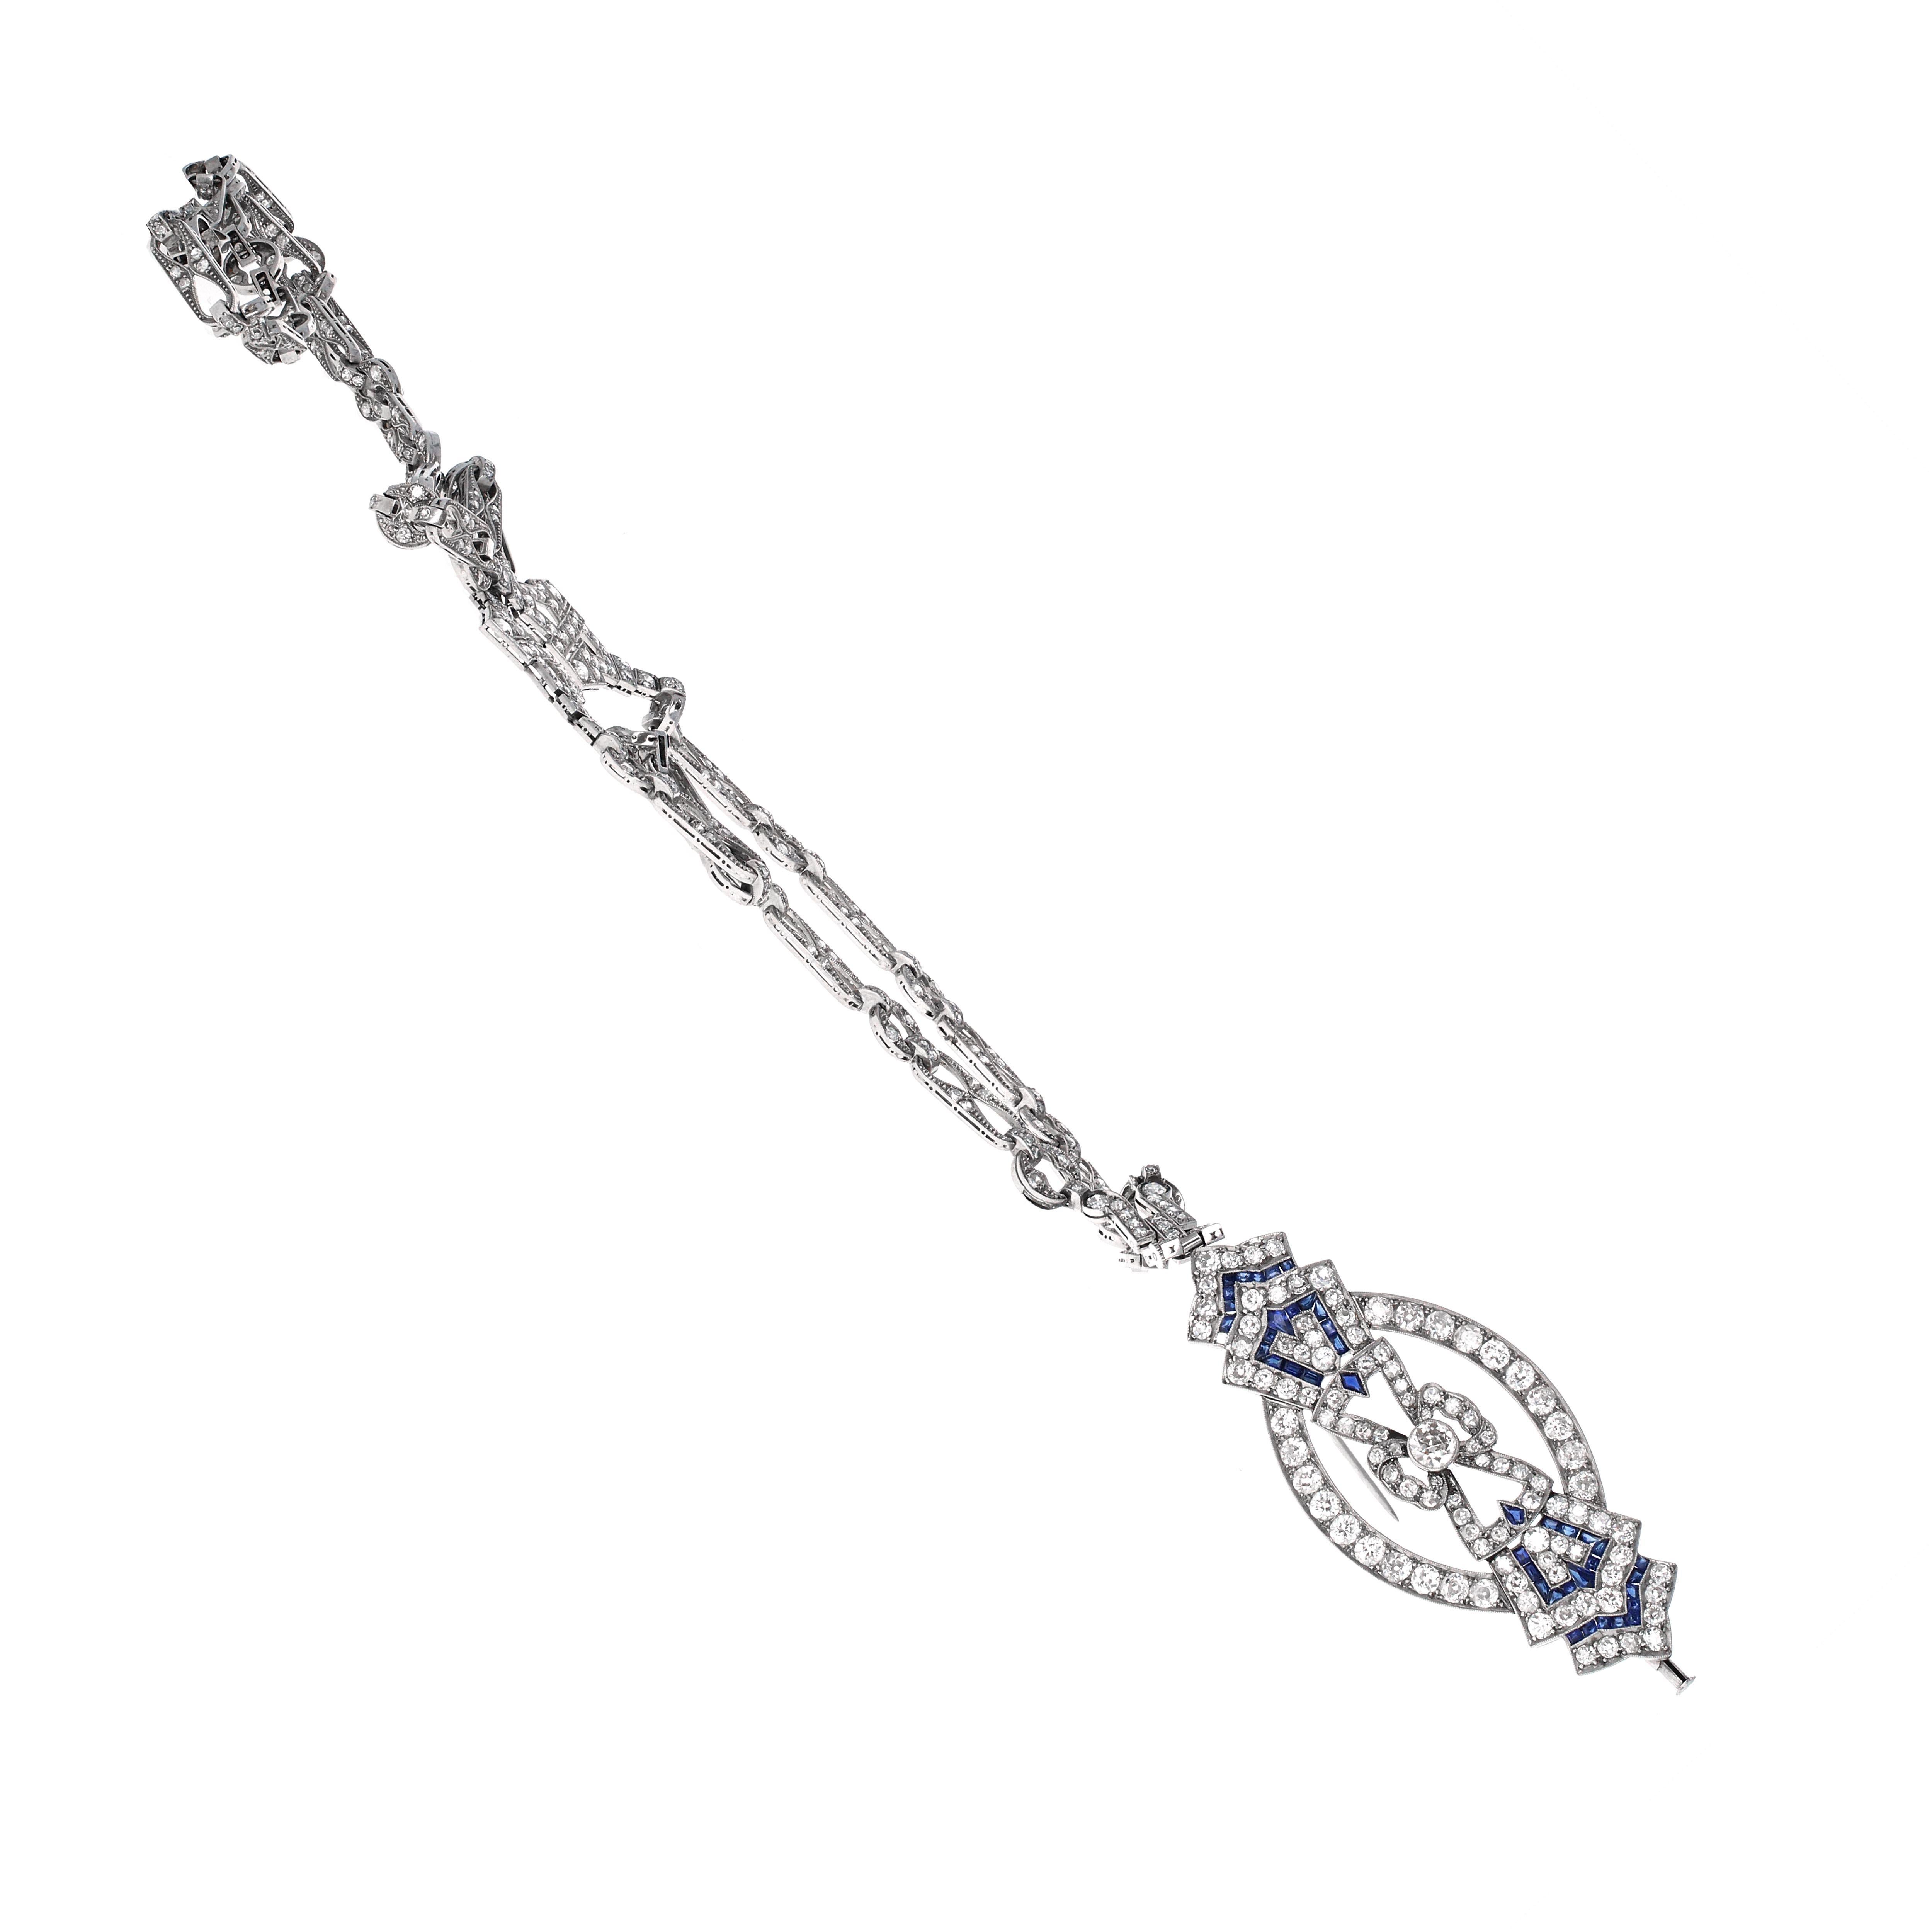 Timeless Art Deco diamond and sapphire sautoir necklace. A sautoir is a French term for a long necklace, chain, ribbon, or scarf  that suspends a tassel or other ornament. The necklace is made in platinum and is in mint condition. This piece can be